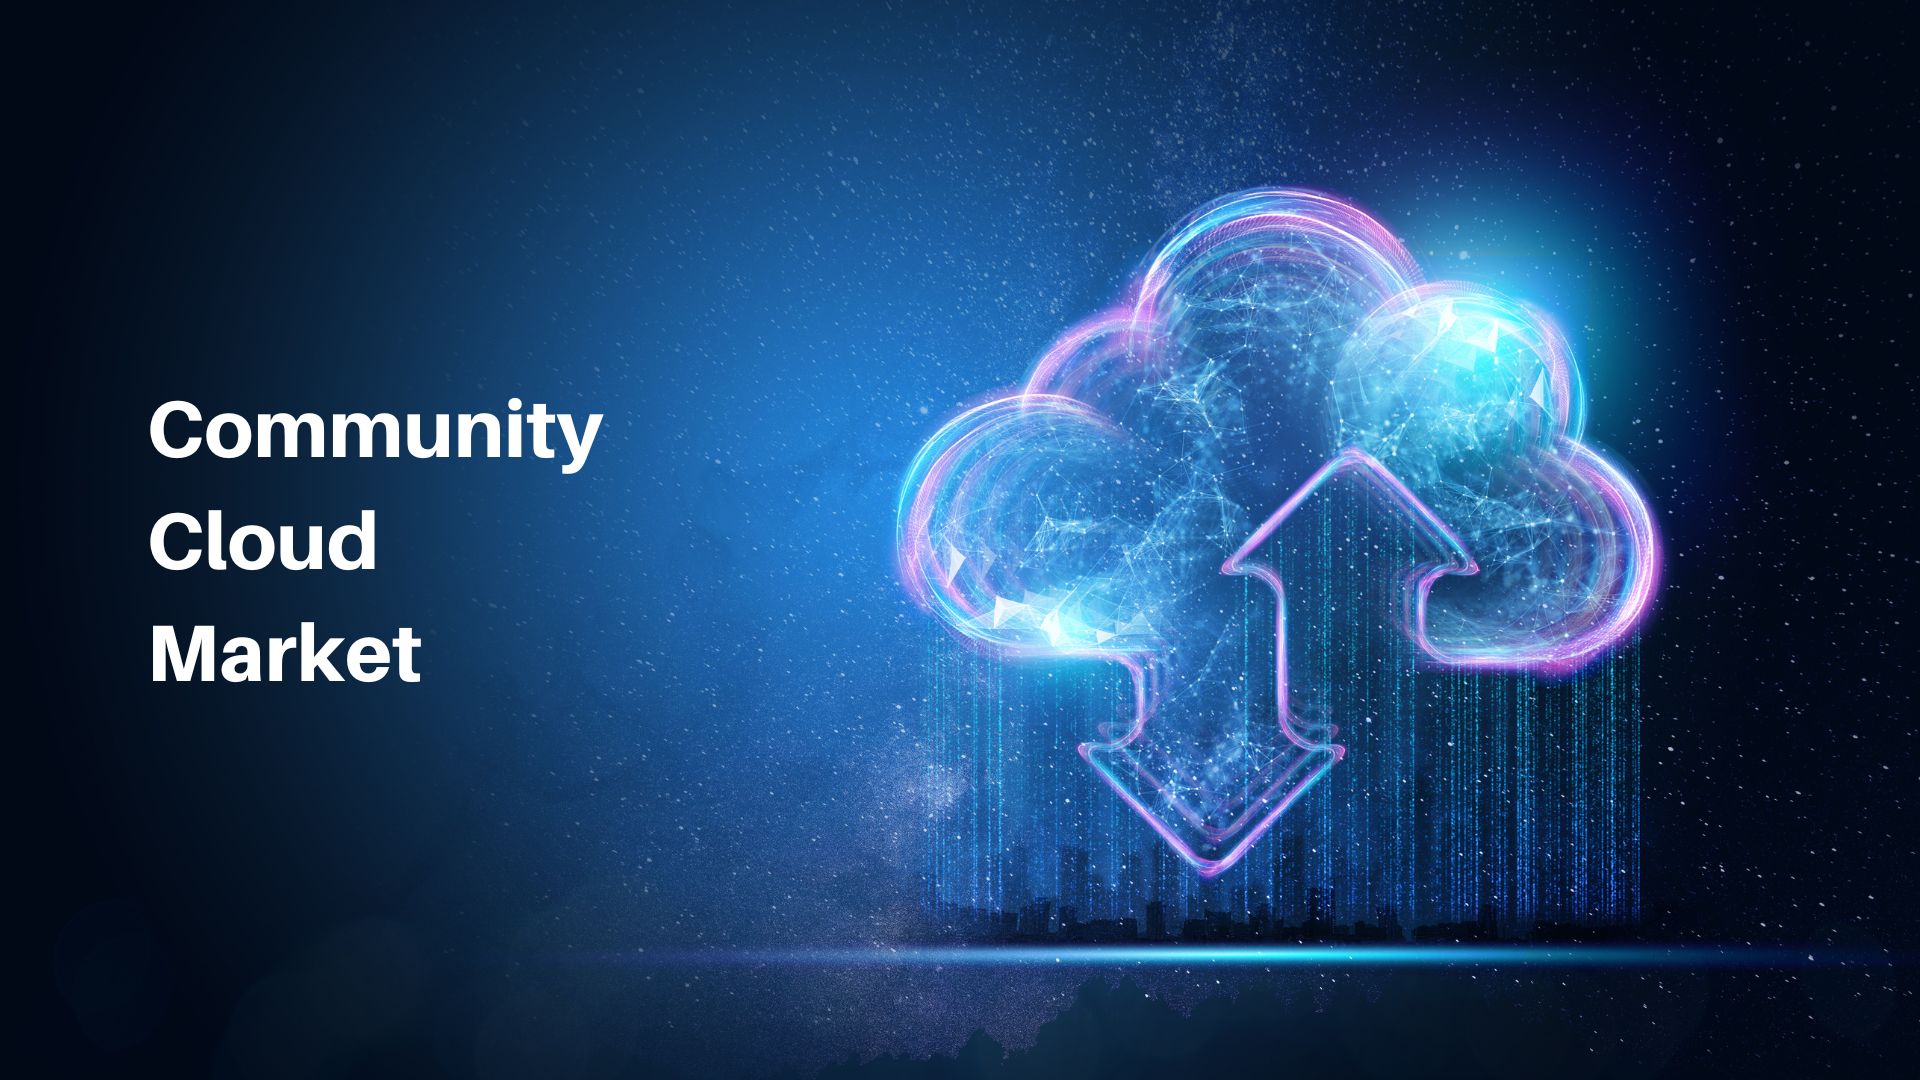 Community Cloud Market size is expected to reach USD 99.51 Bn by 2033